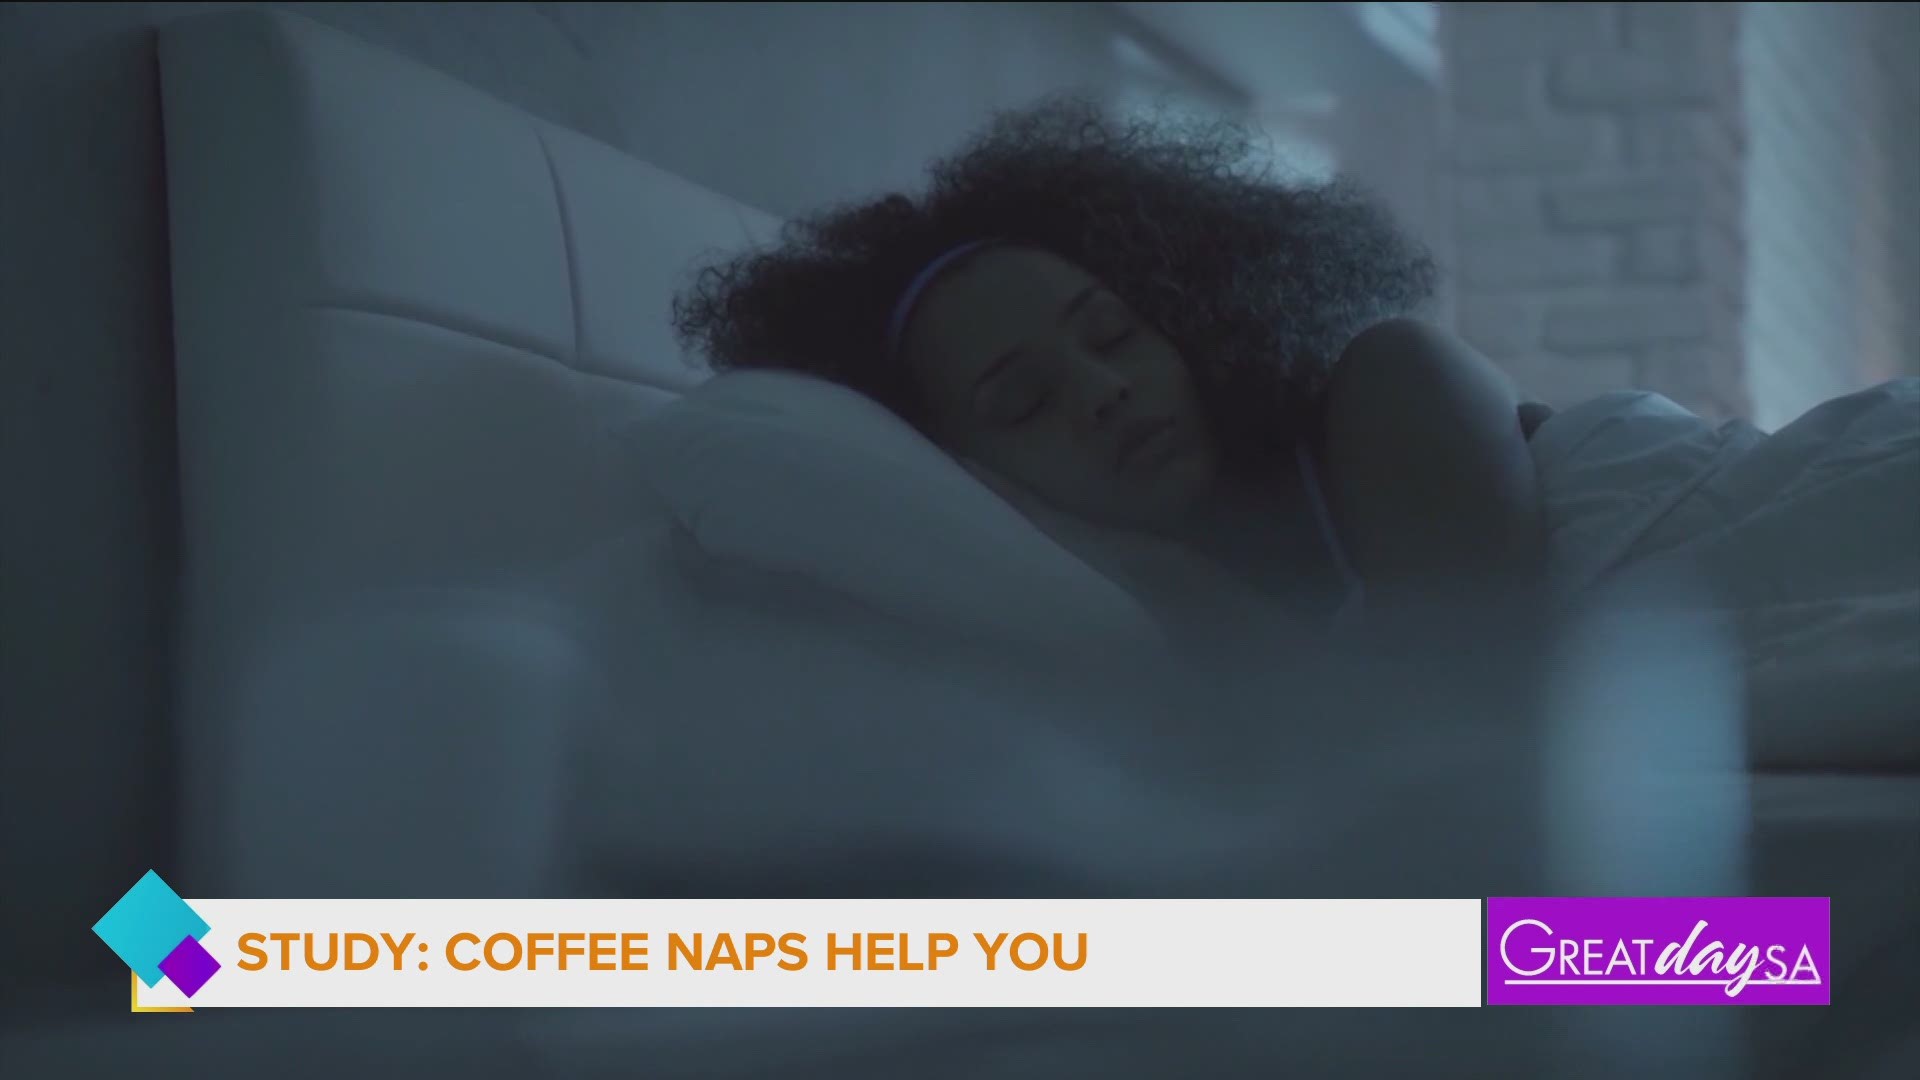 A new study suggests that taking a nap after you drink a cup of coffee could make the caffeine kick work better!